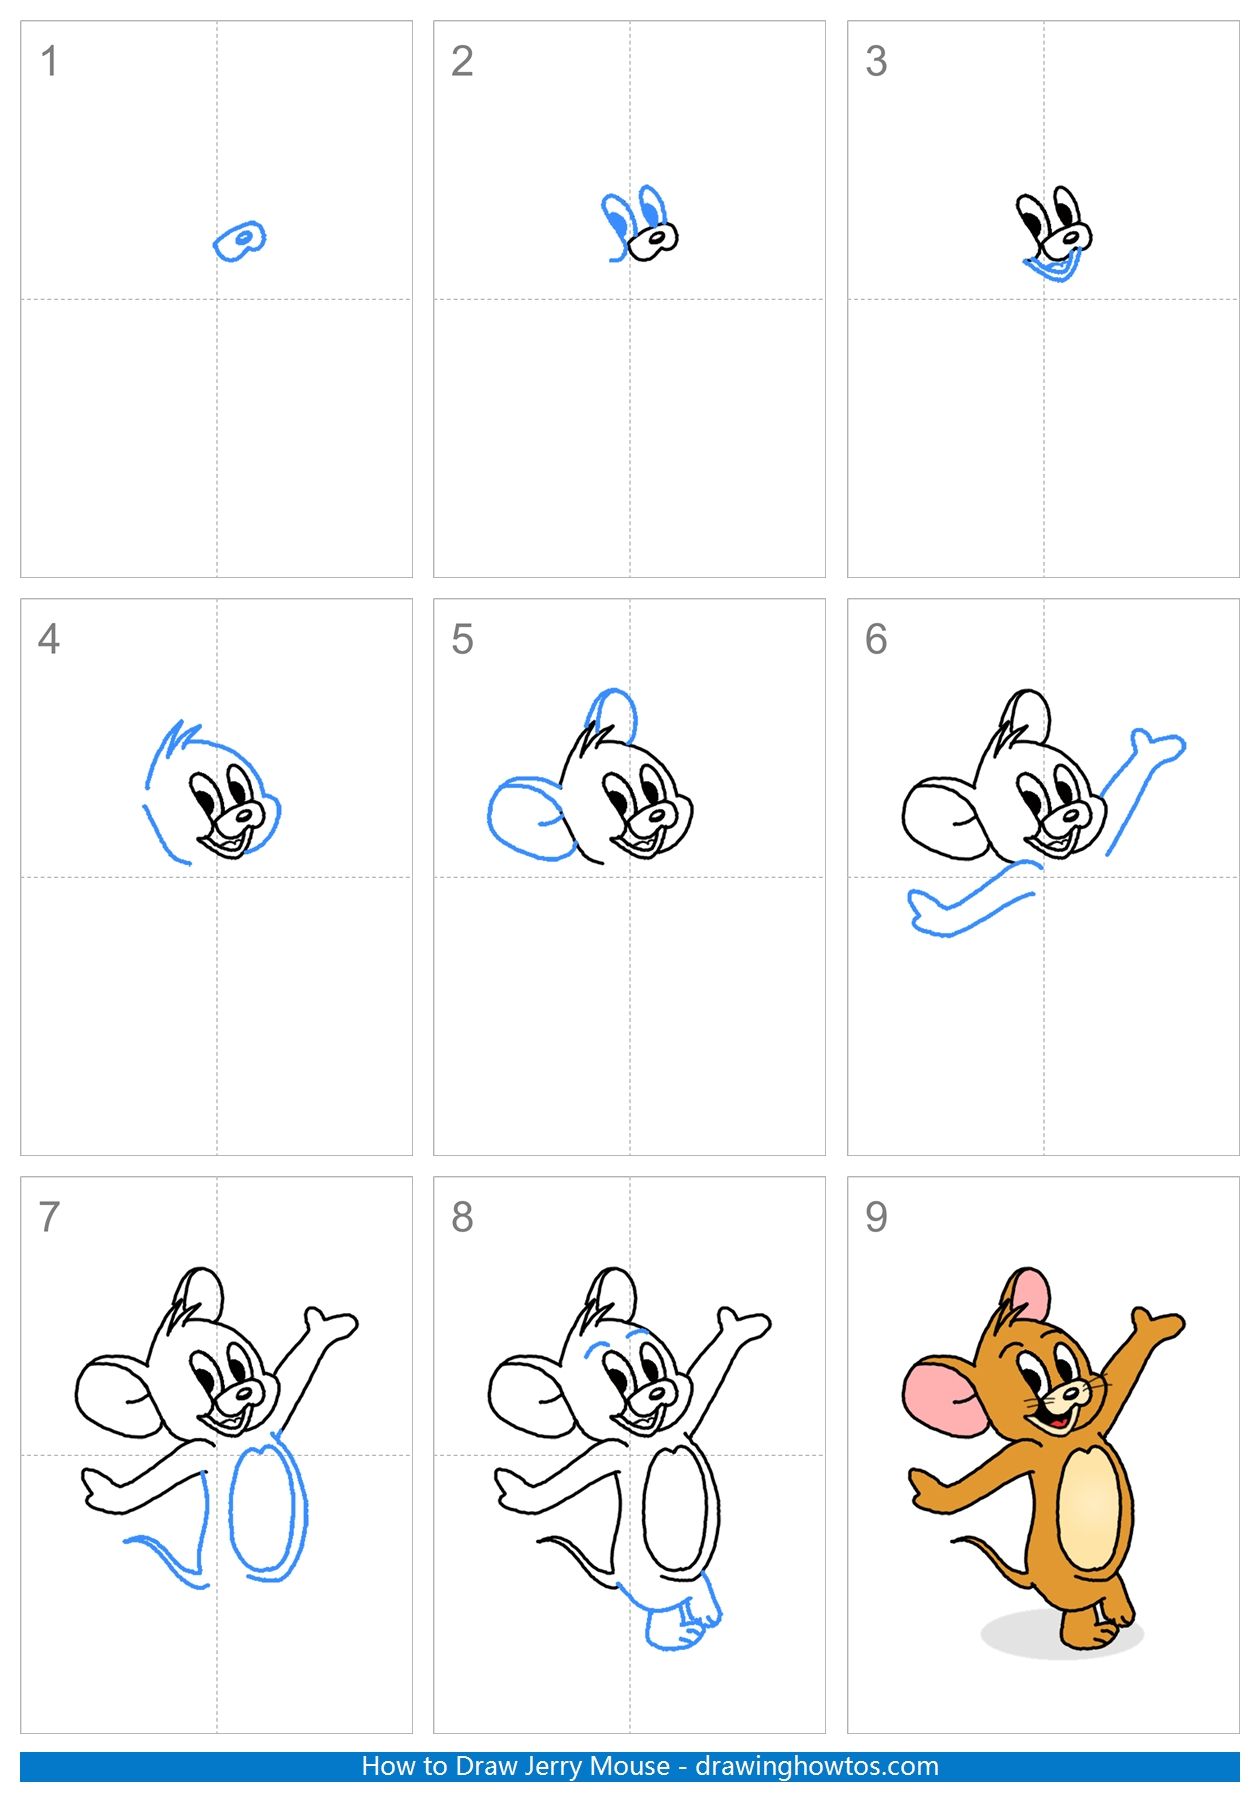 How to Draw Jerry Mouse Step by Step